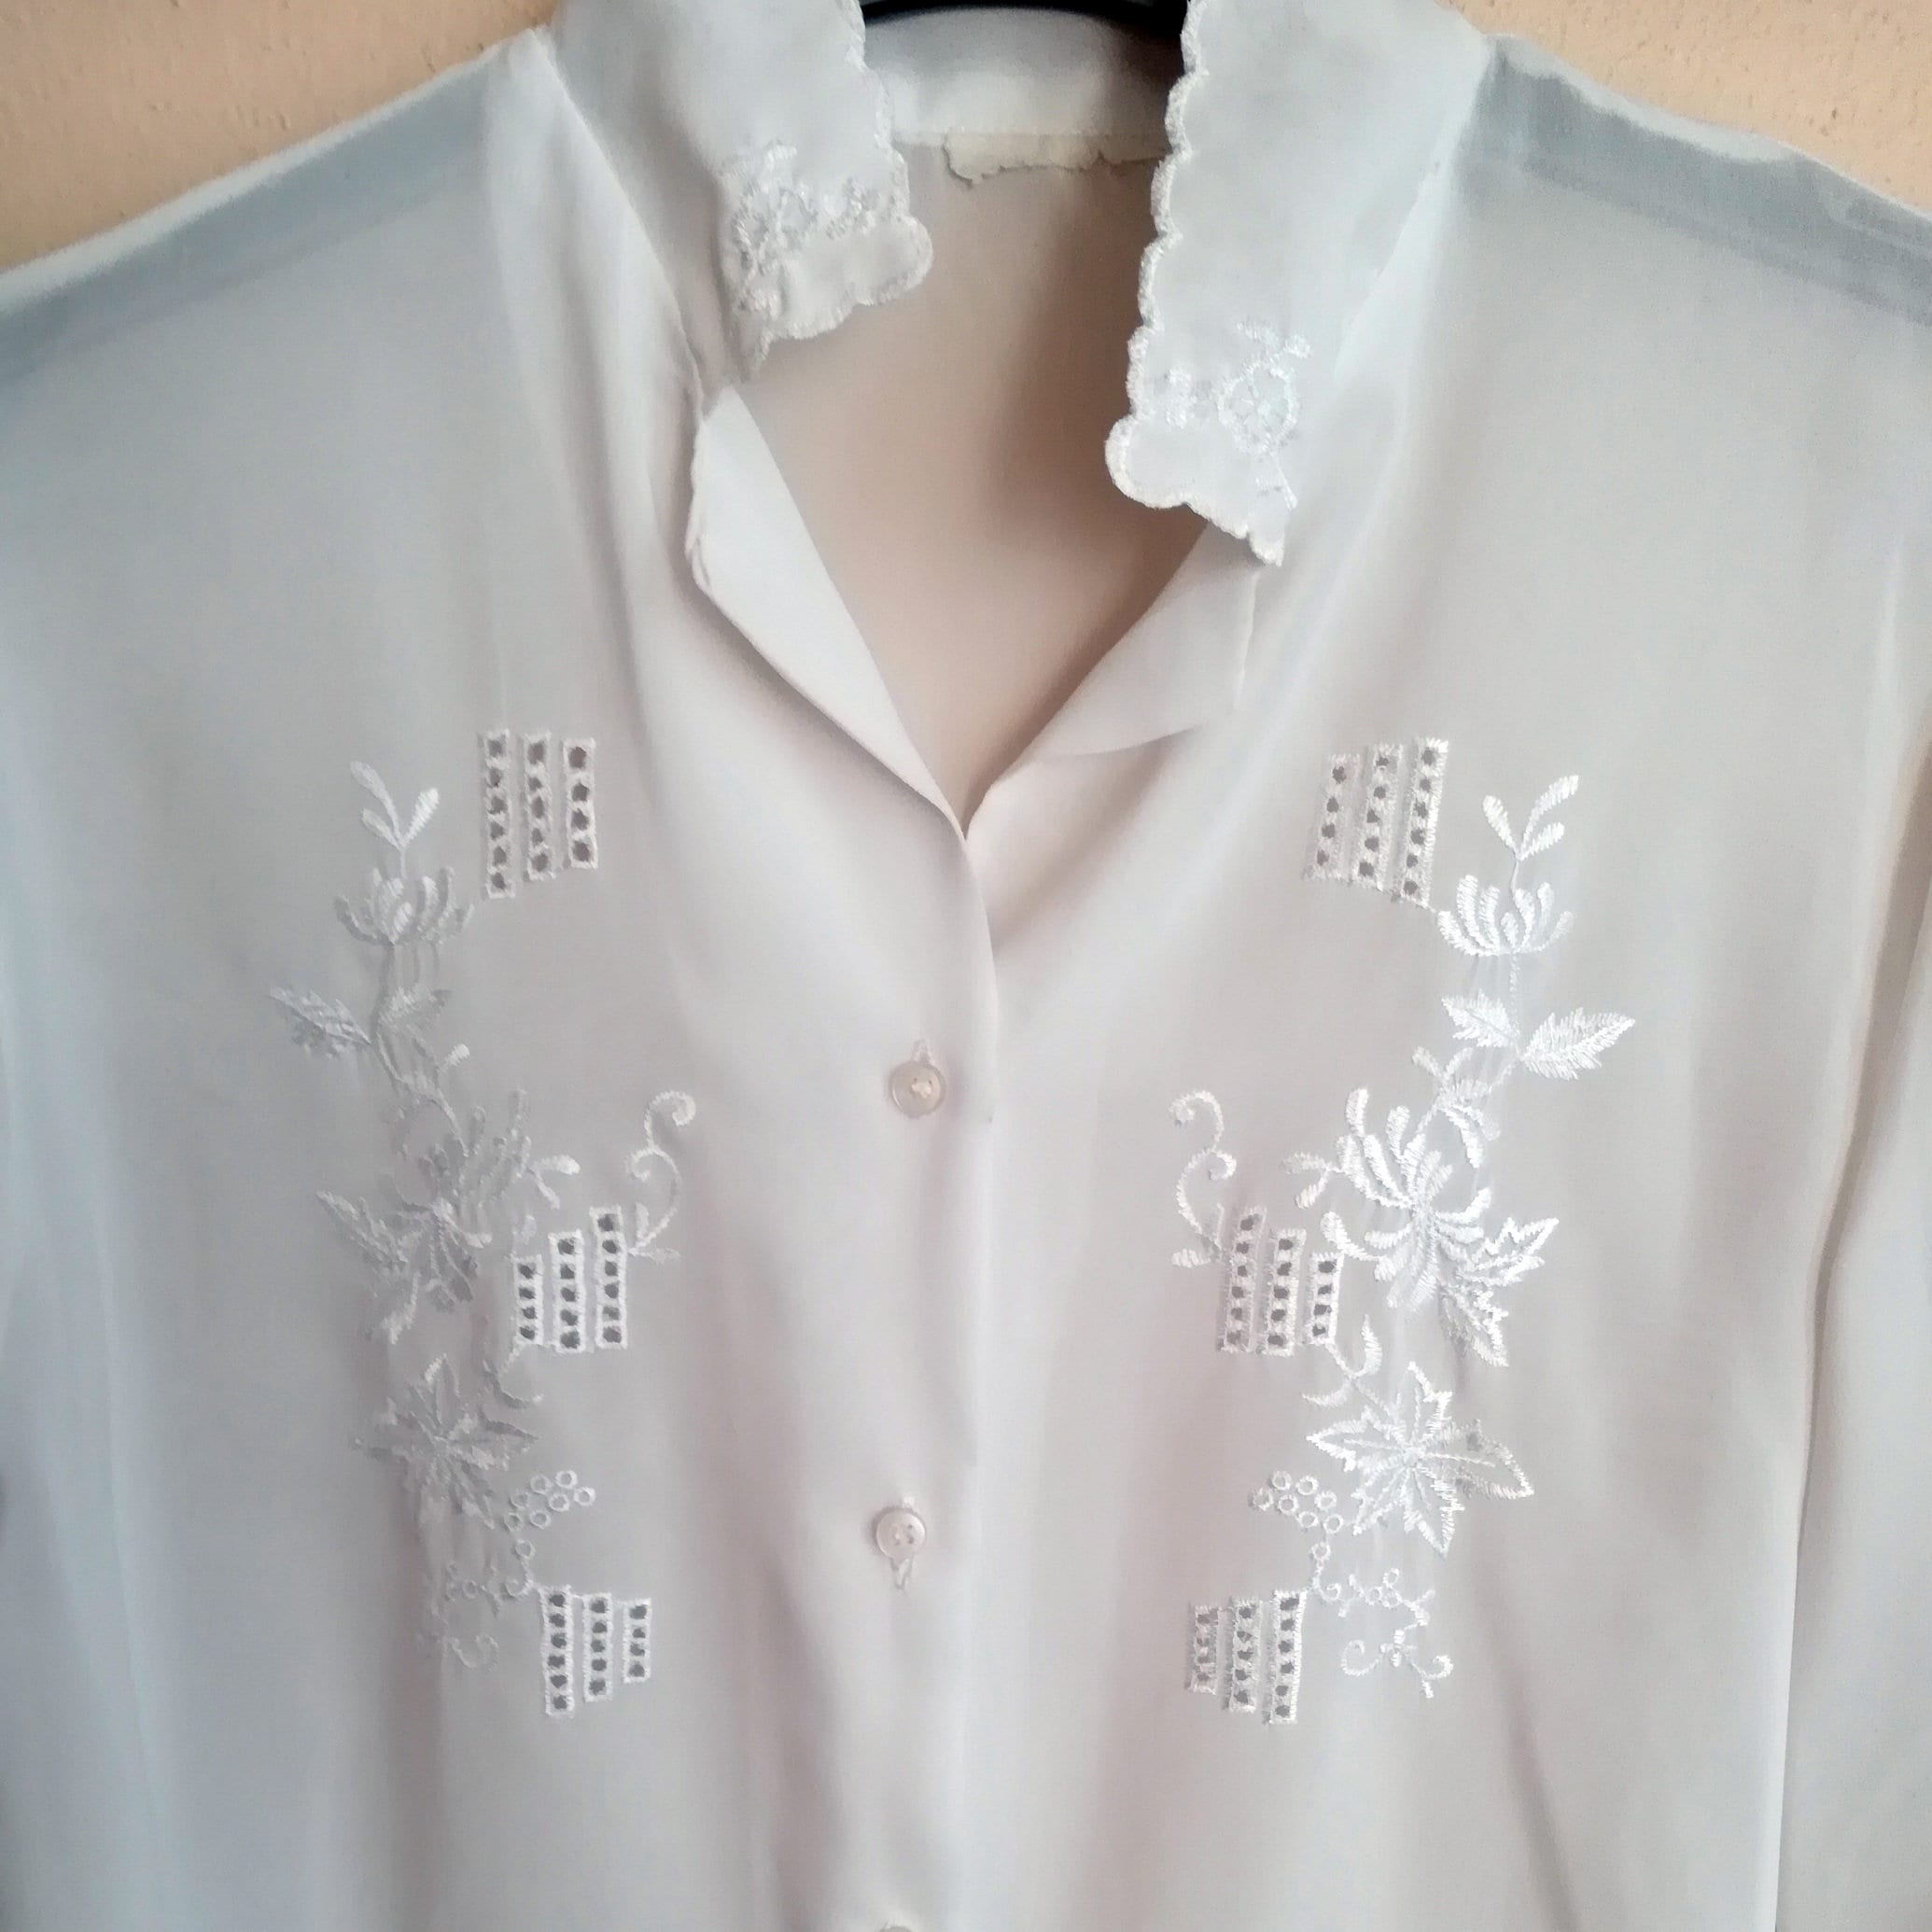 White see through blouse women vintage 70s embroidered blouse | Etsy